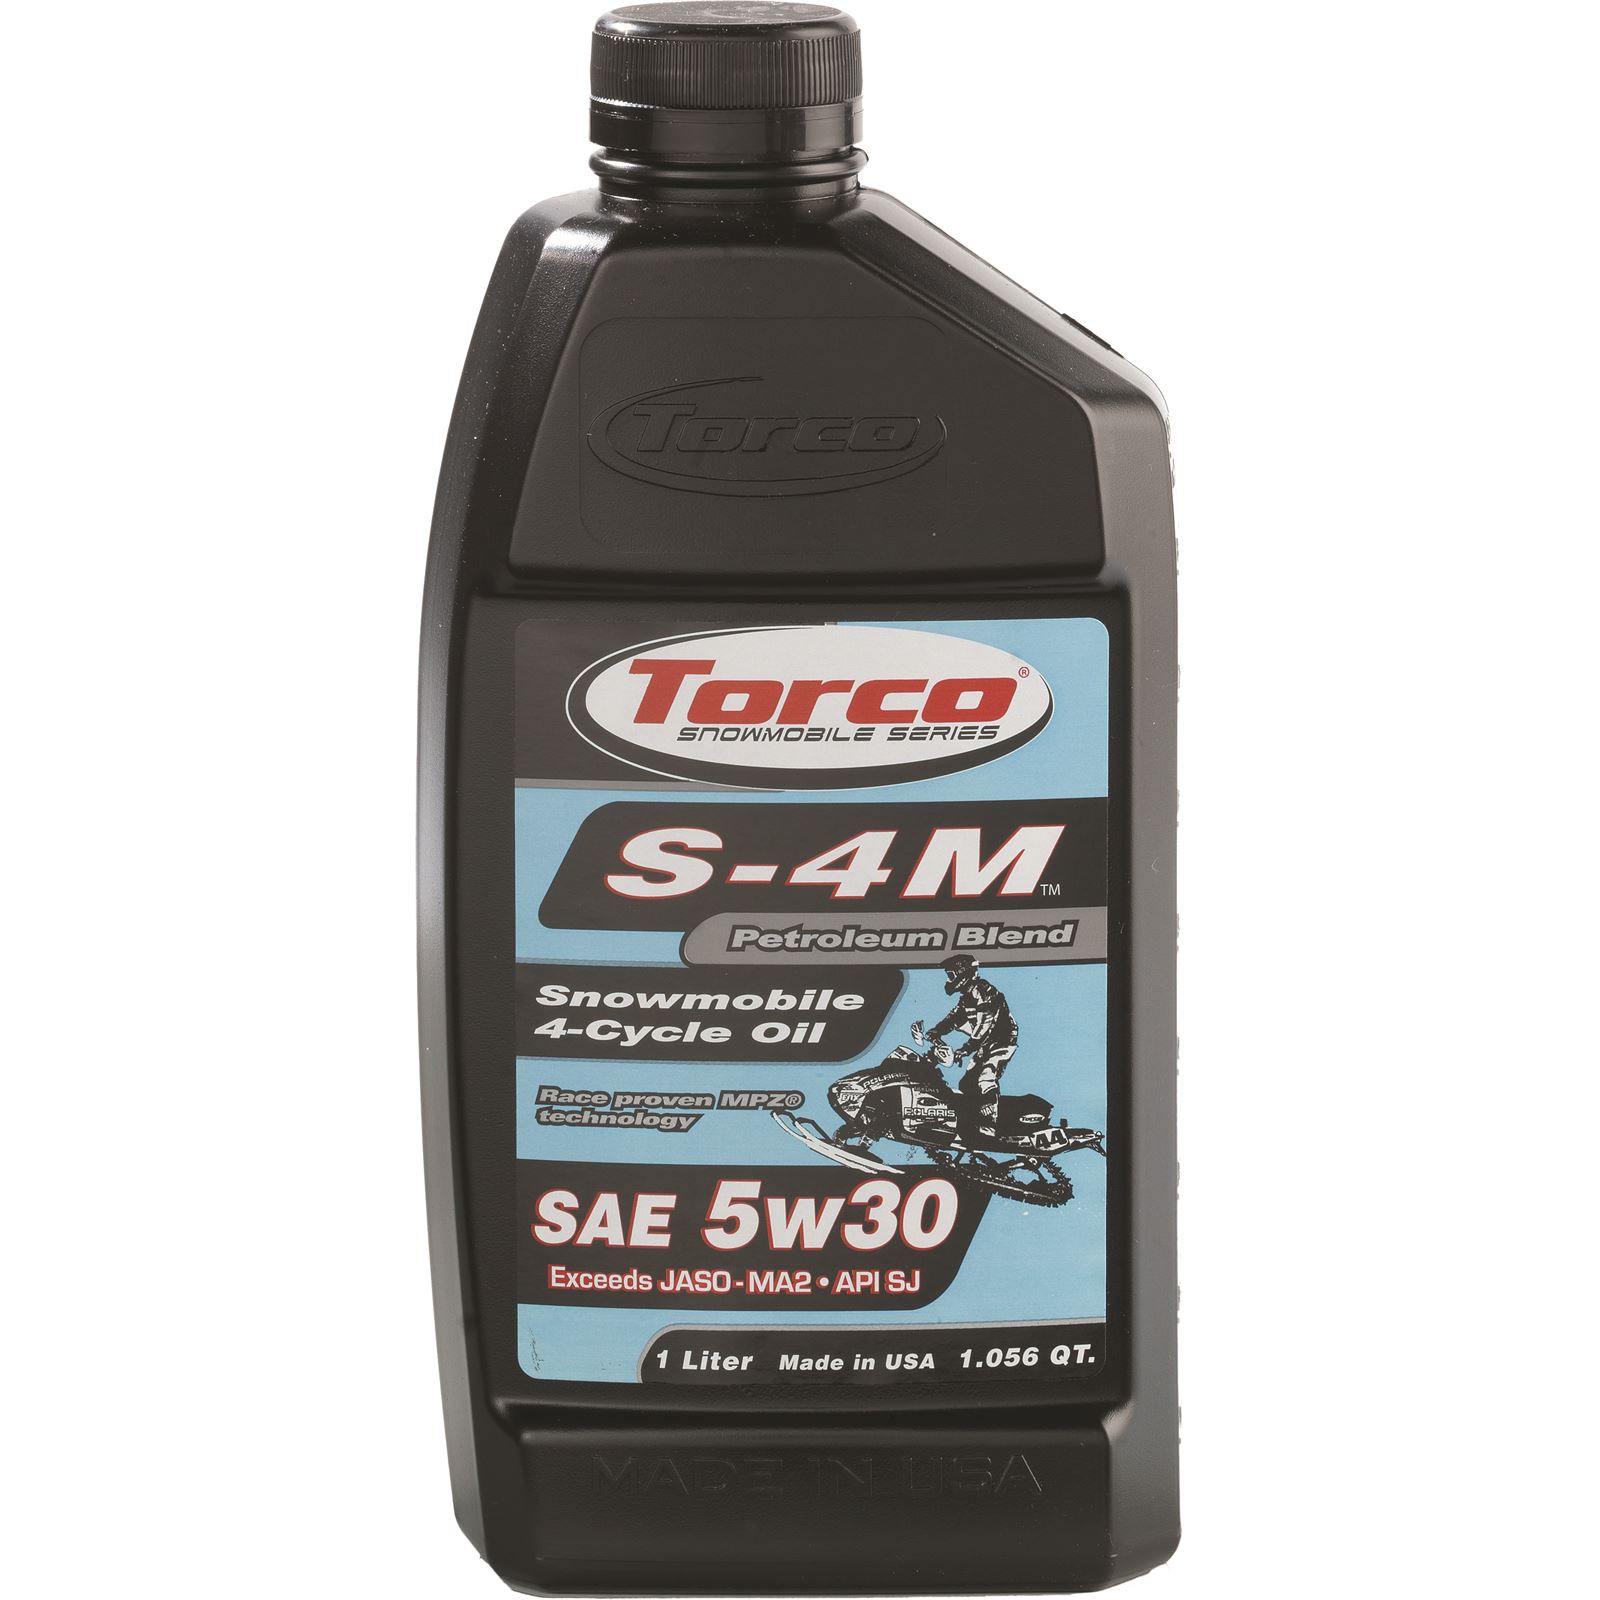 Torco S-4M 4-Cycle Lubrication